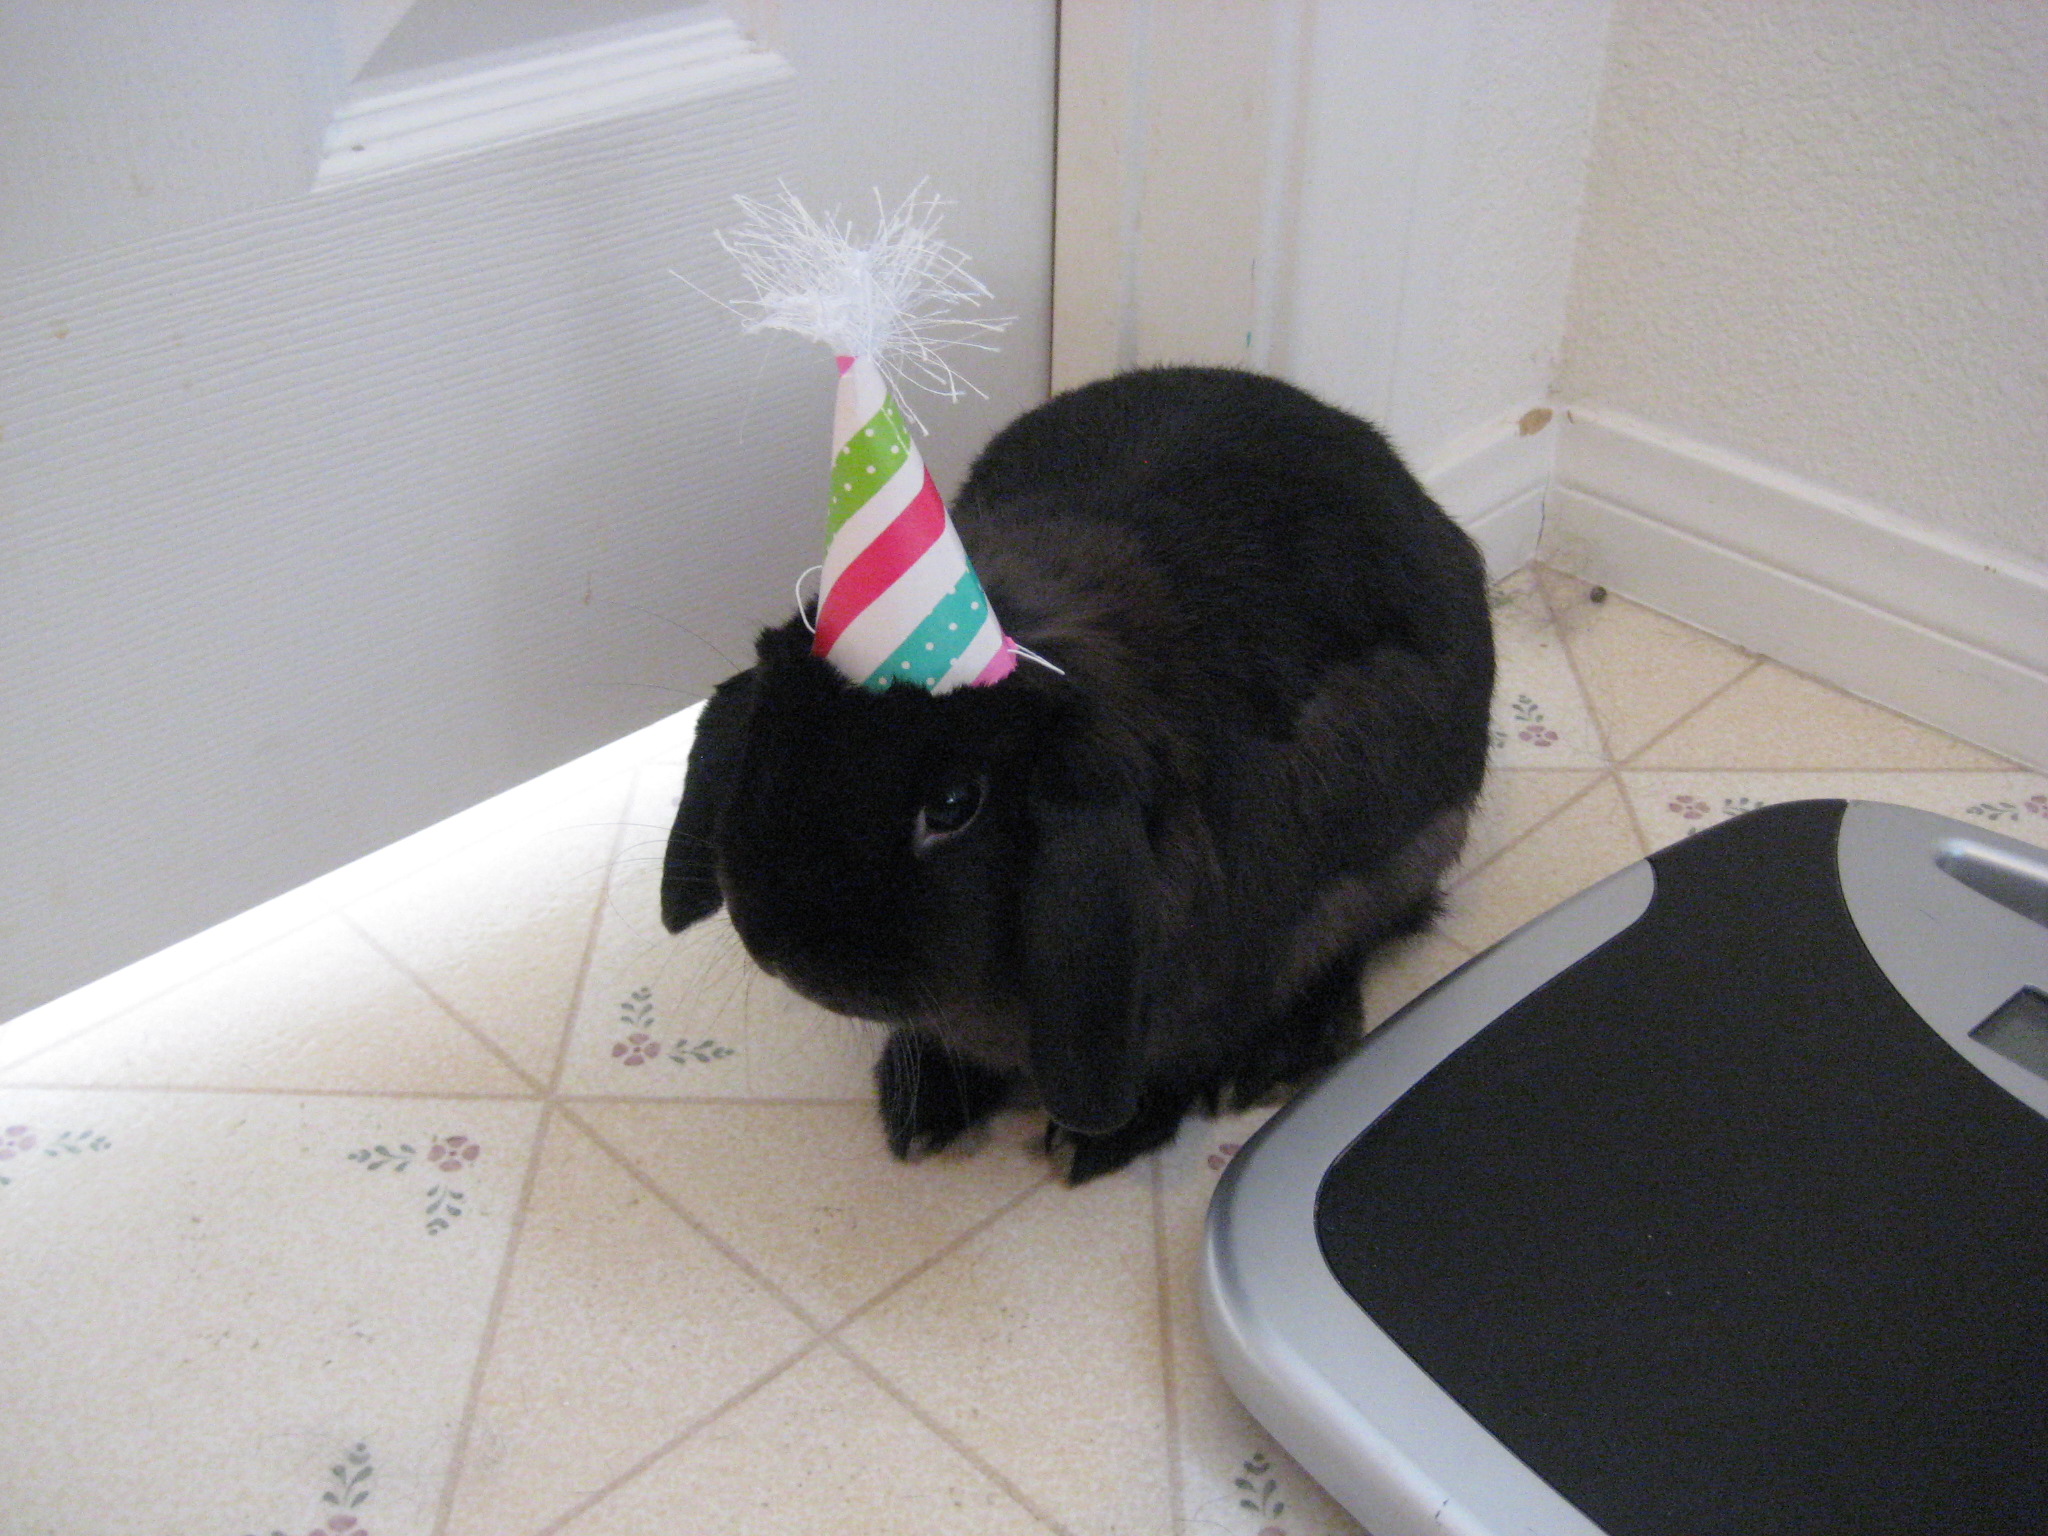 Shy Bunny Hides from Guests at His Own Birthday Party